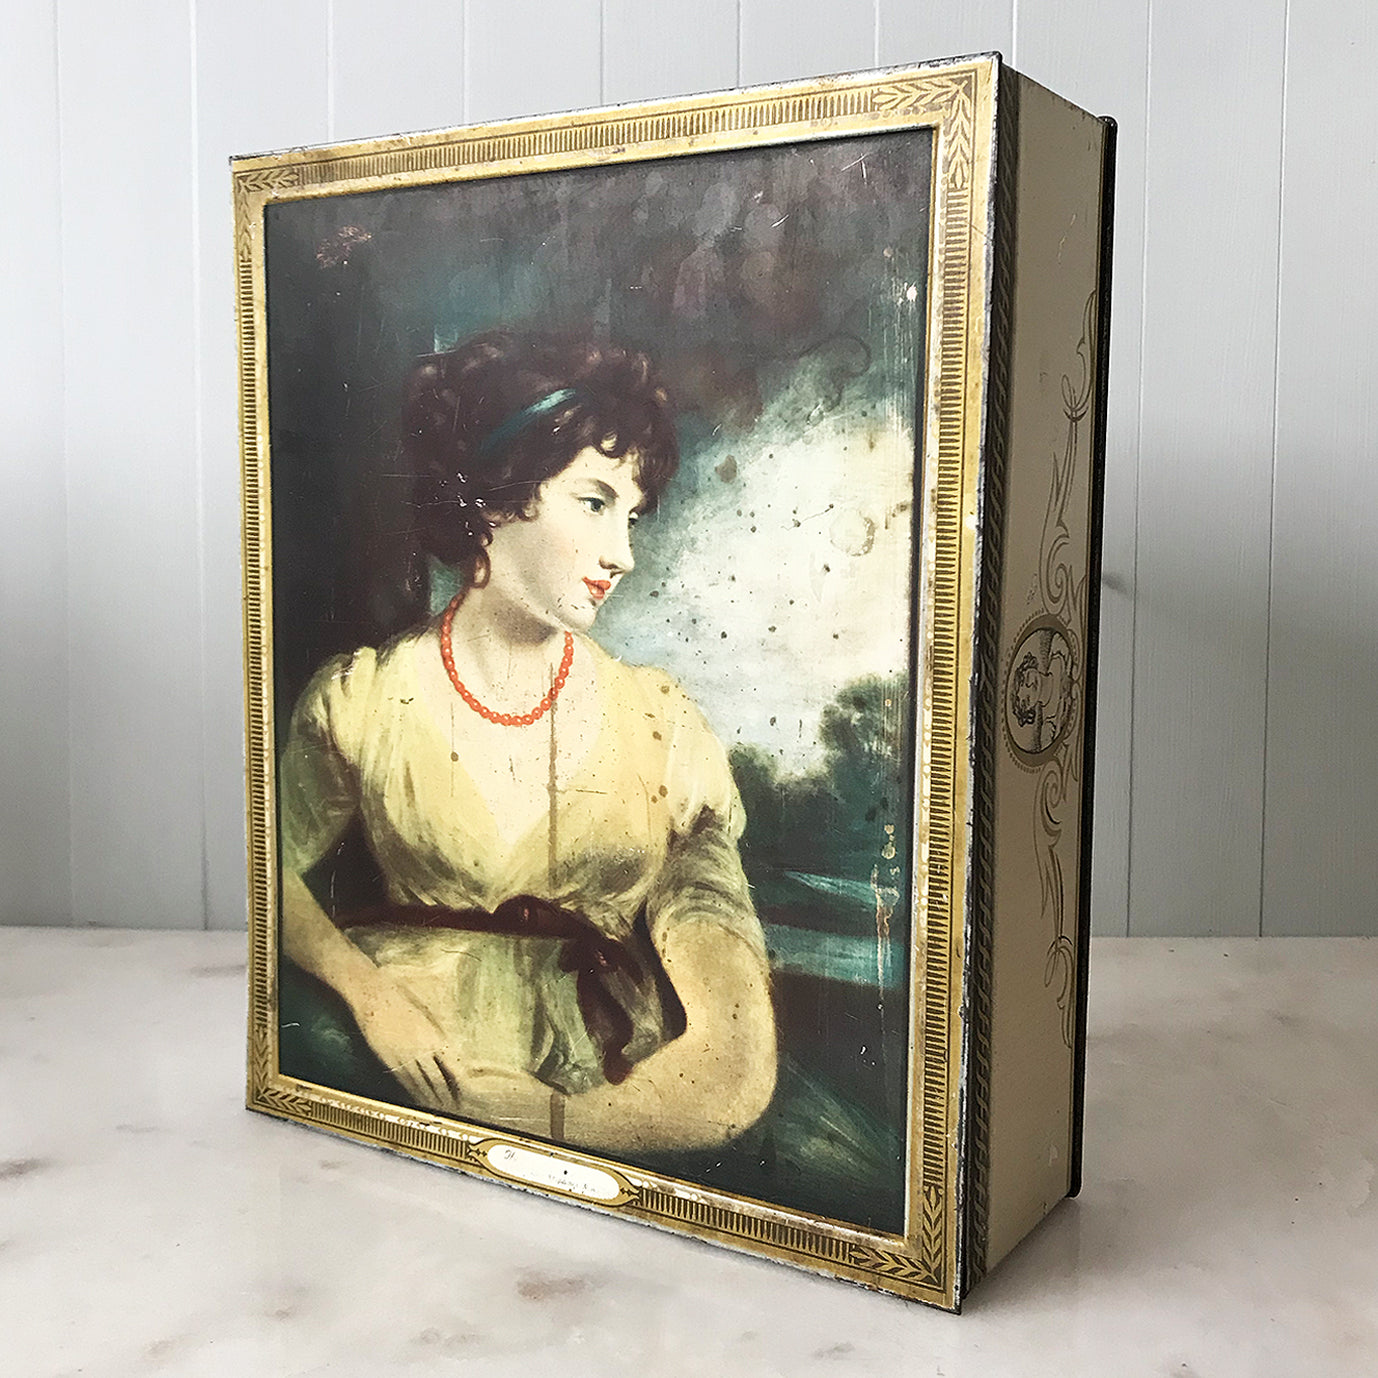 Vintage 1950s Peak Frean & Co Biscuit Tin with the Countess of Oxford after John Hoppner on the front. It has fab little line illustrations of the lady on the sides with classical gold framing and embellishments - SHOP NOW - www.intovintage.co.uk